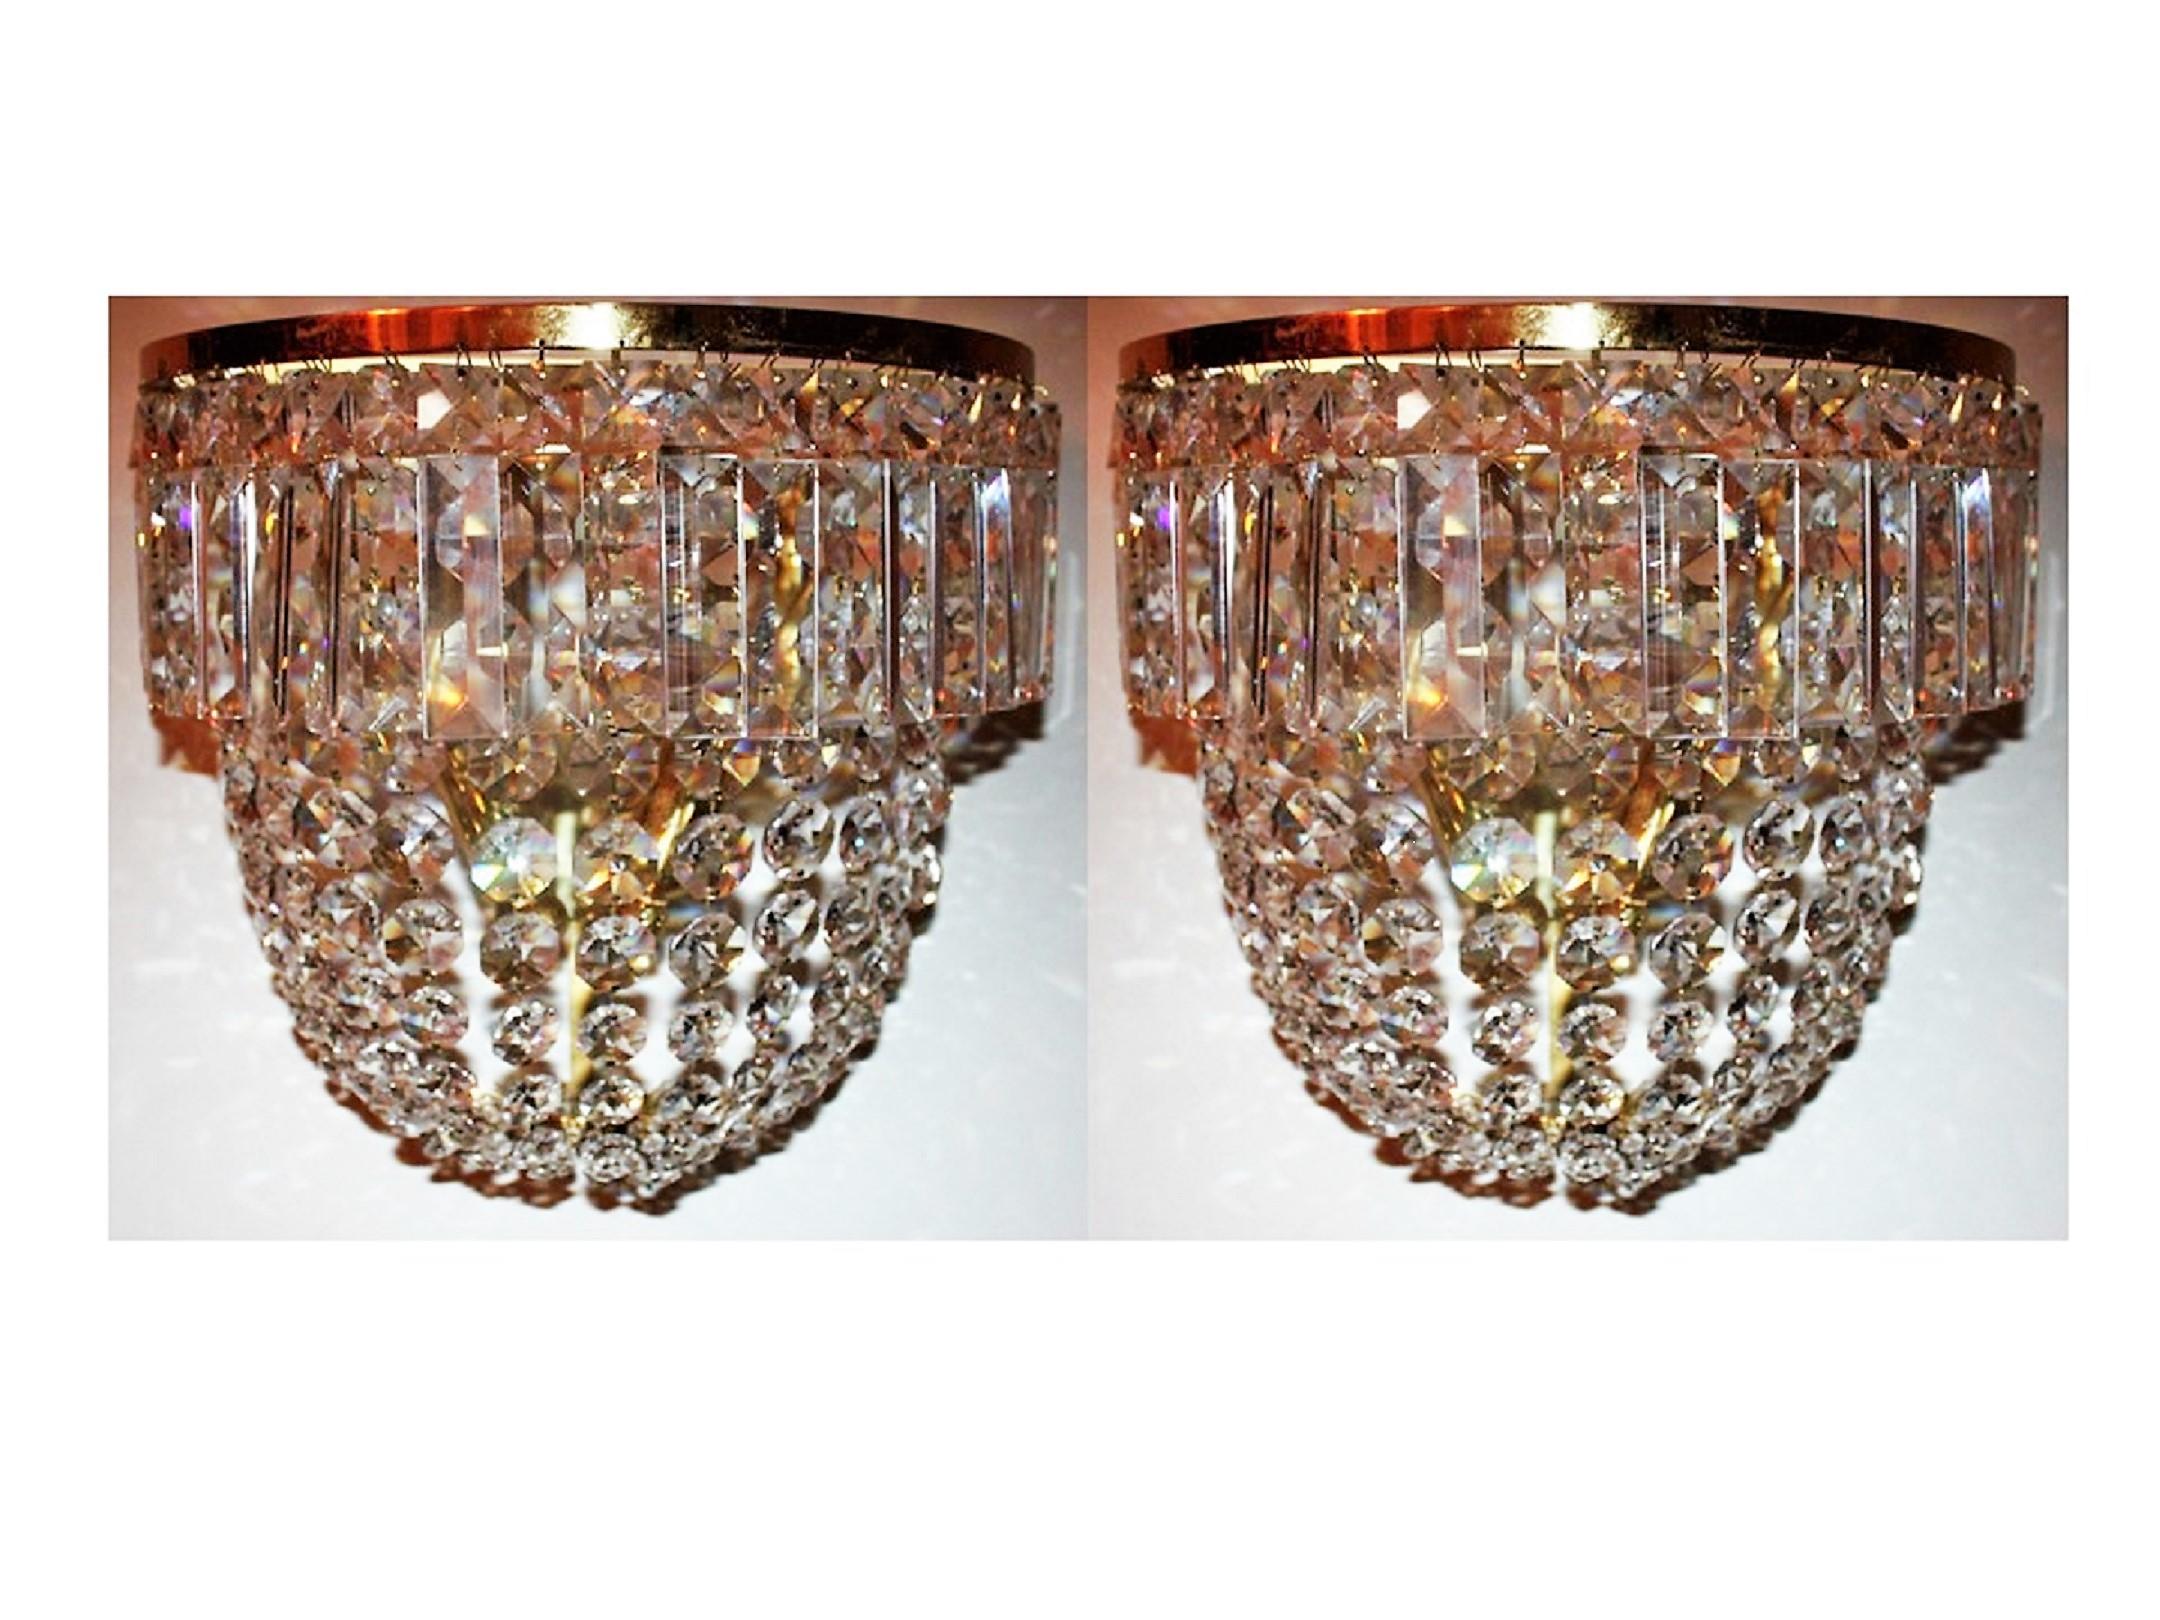 Pair of Grand Wall Sconces by Ch. Palme, Germany, 1960s, Cut Crystal and Brass 3